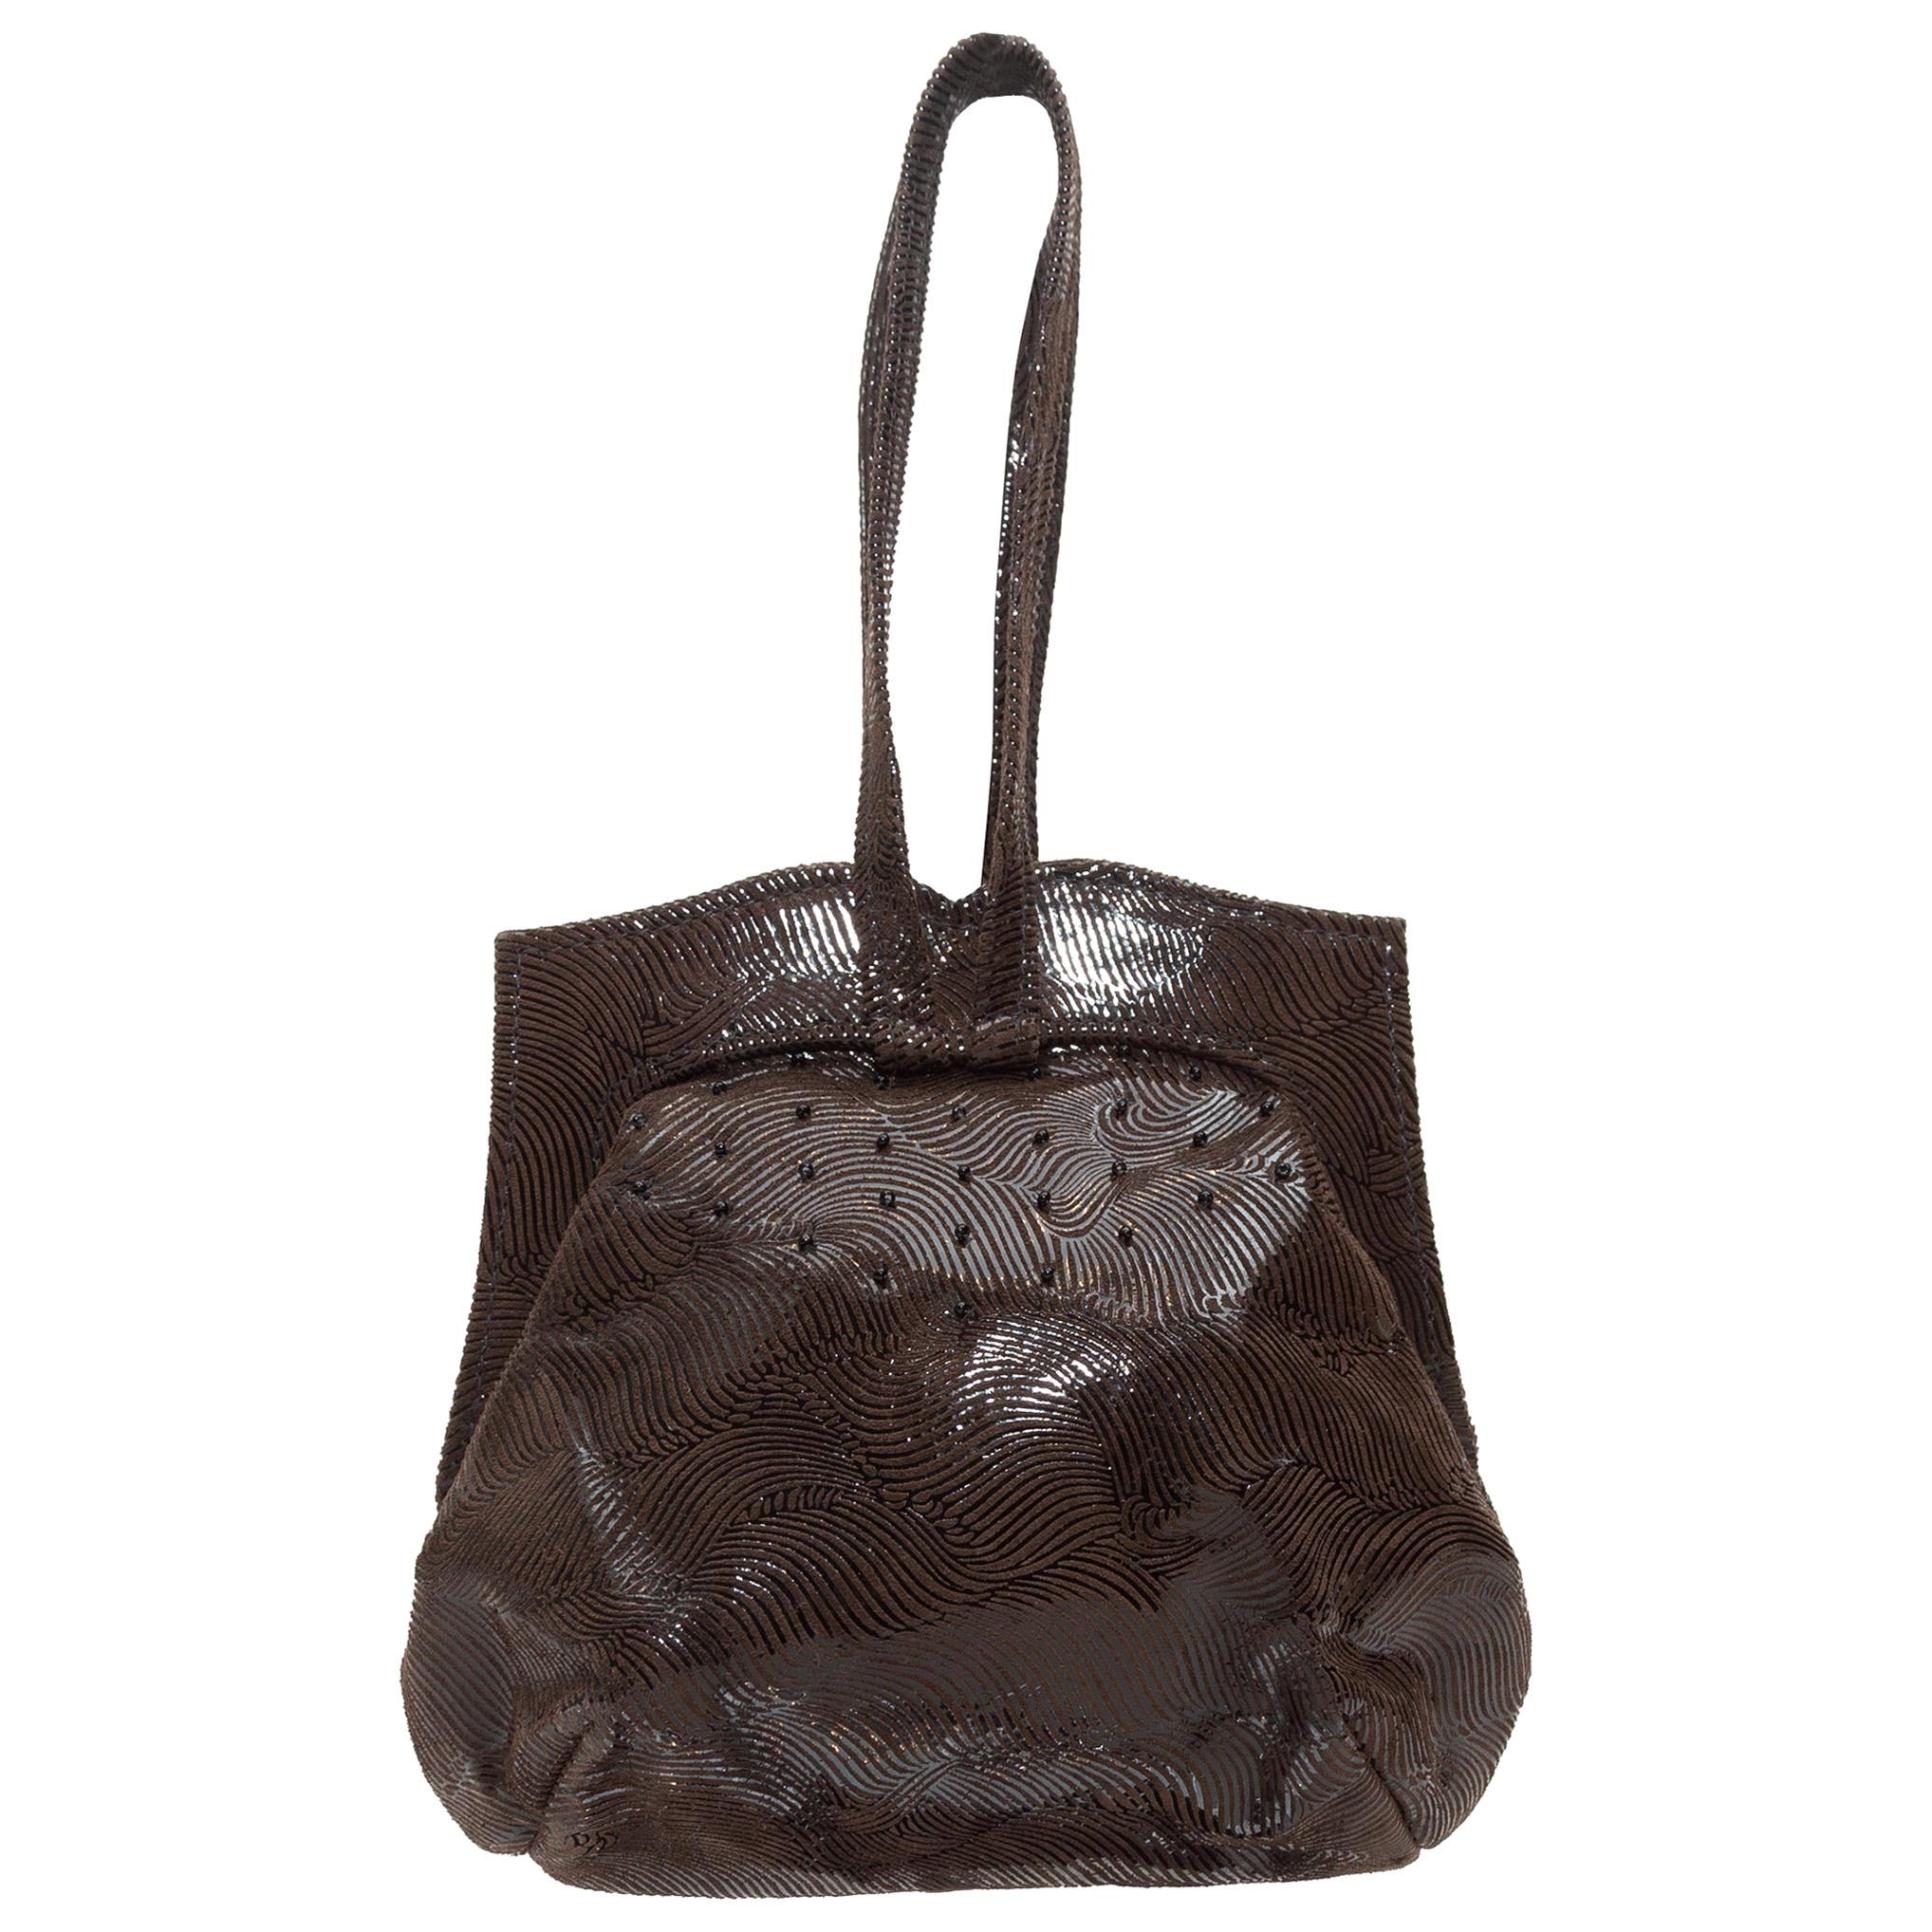 Michelle LaLonde Dark Brown Embossed Leather Evening Bag